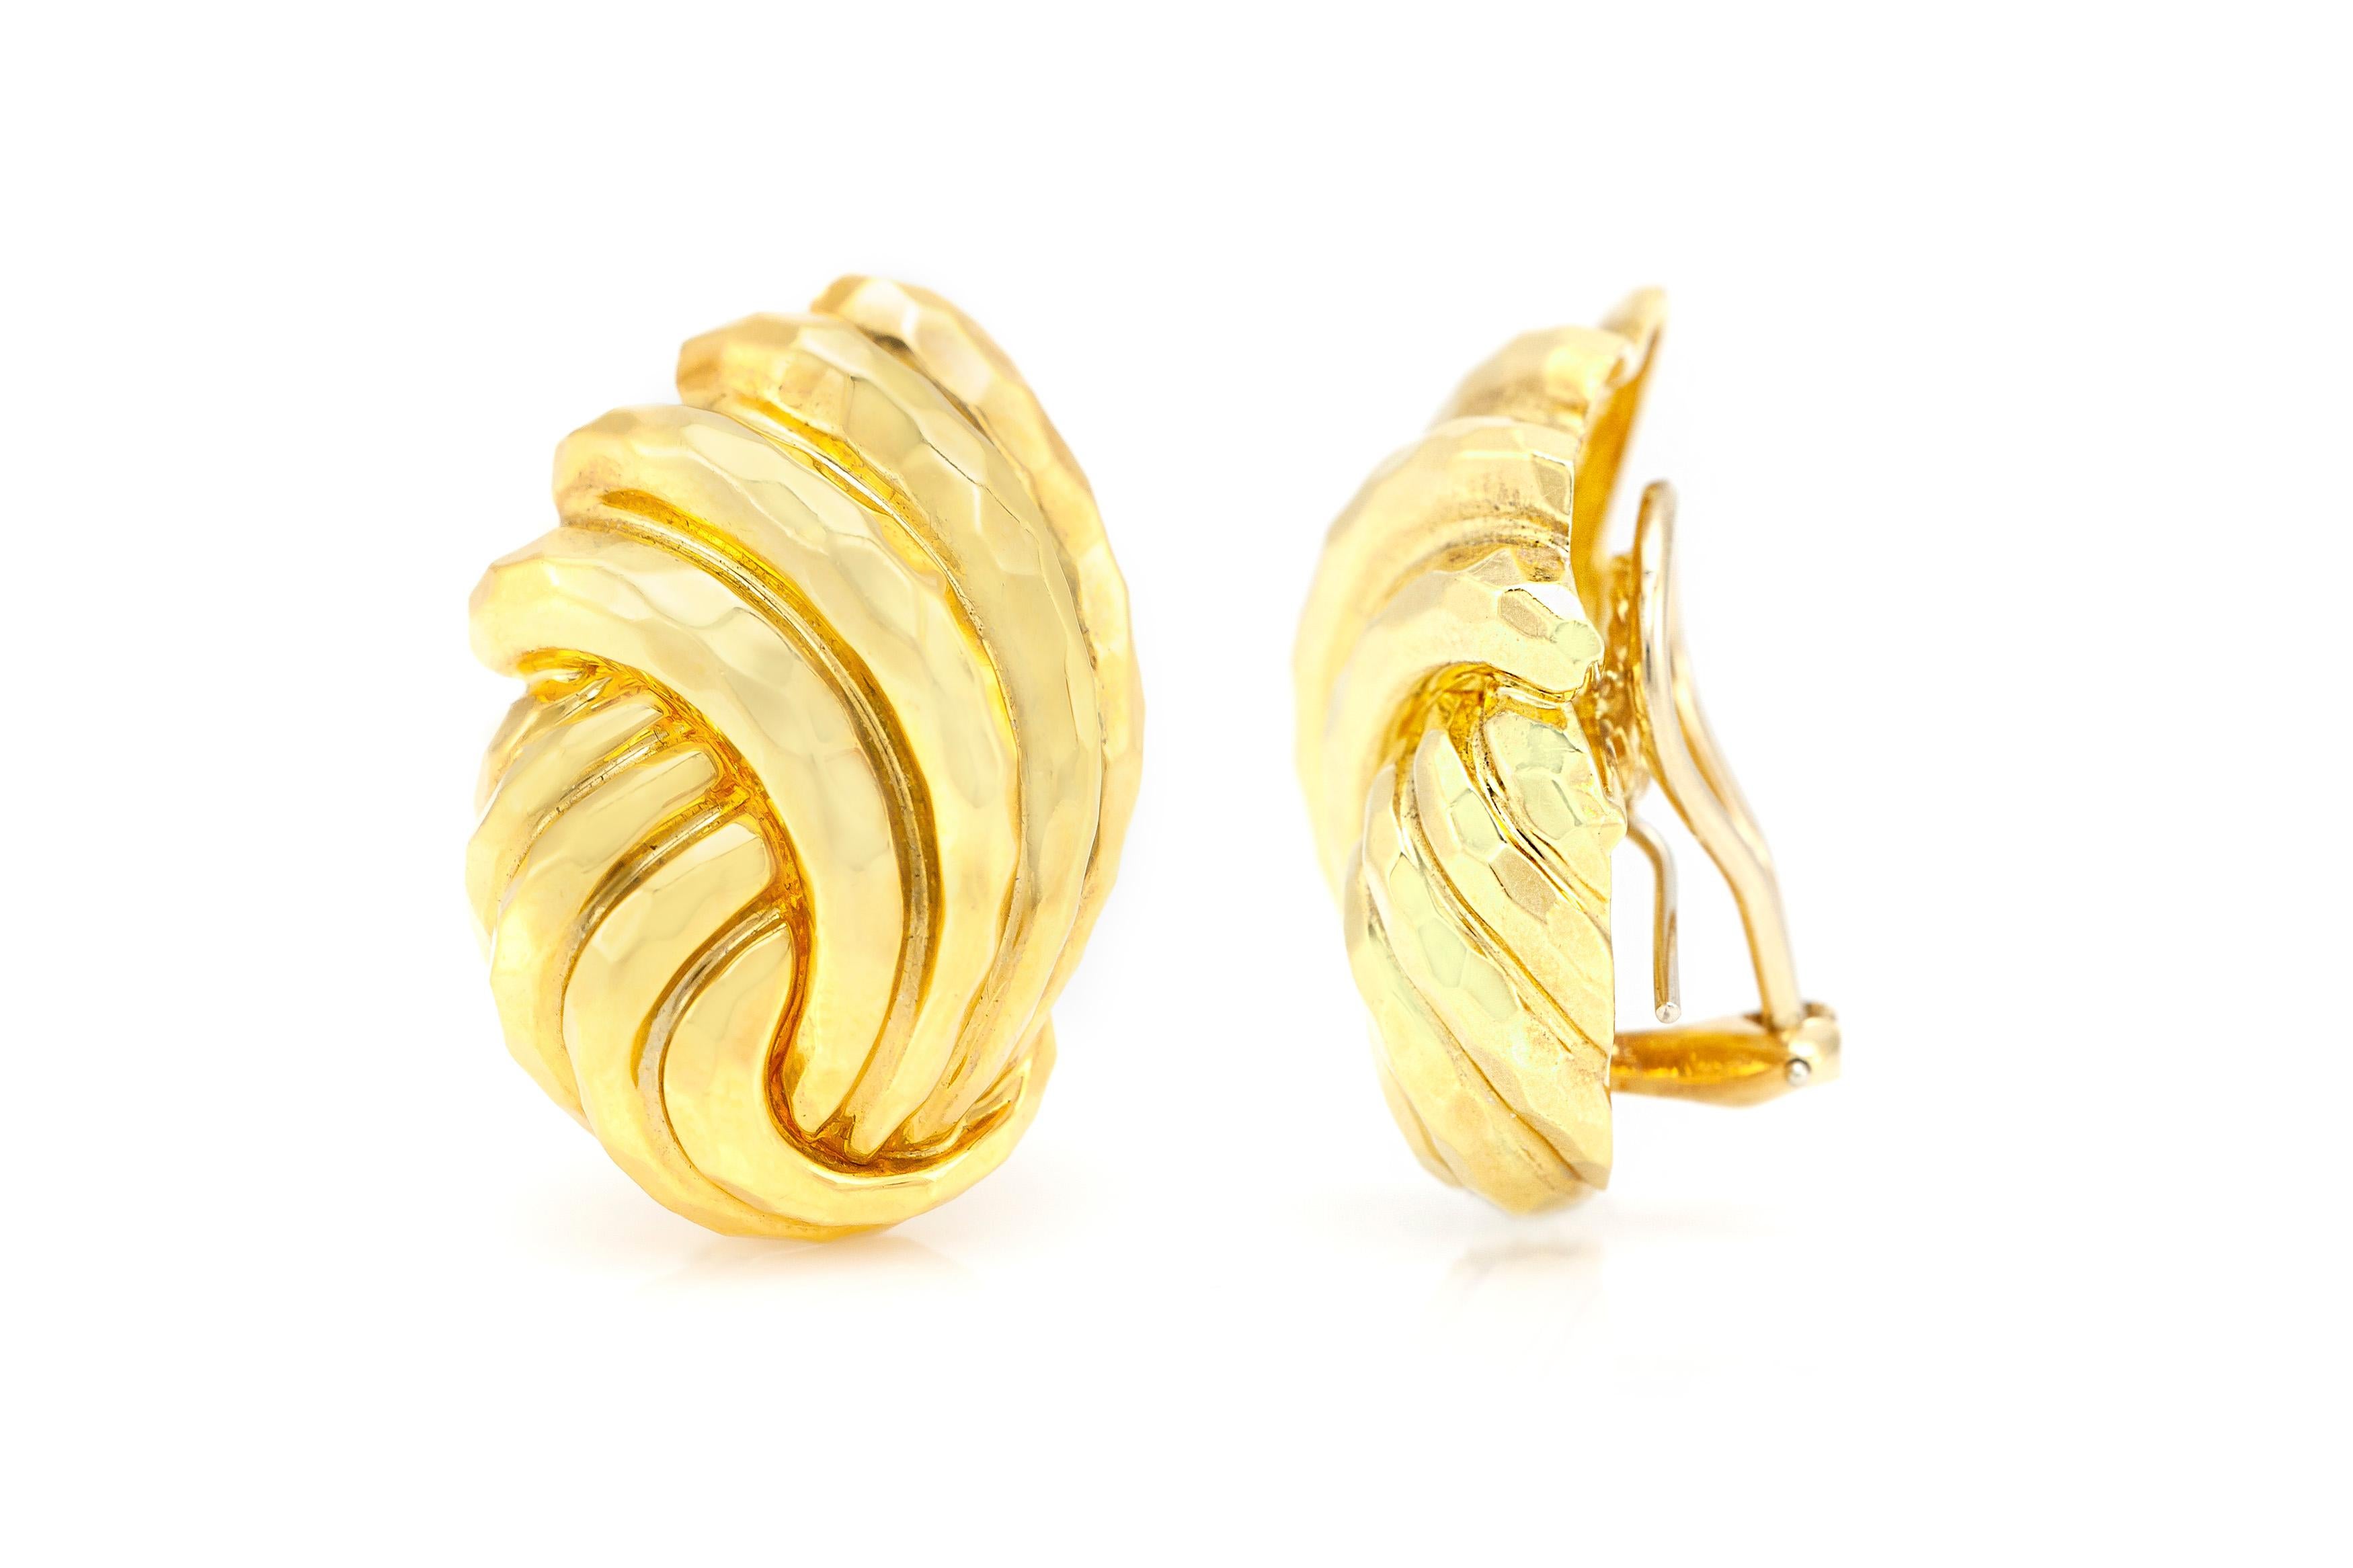 The earrings is finely crafted in 18k yellow gold and weighing approximately total of 16.8 dwt.